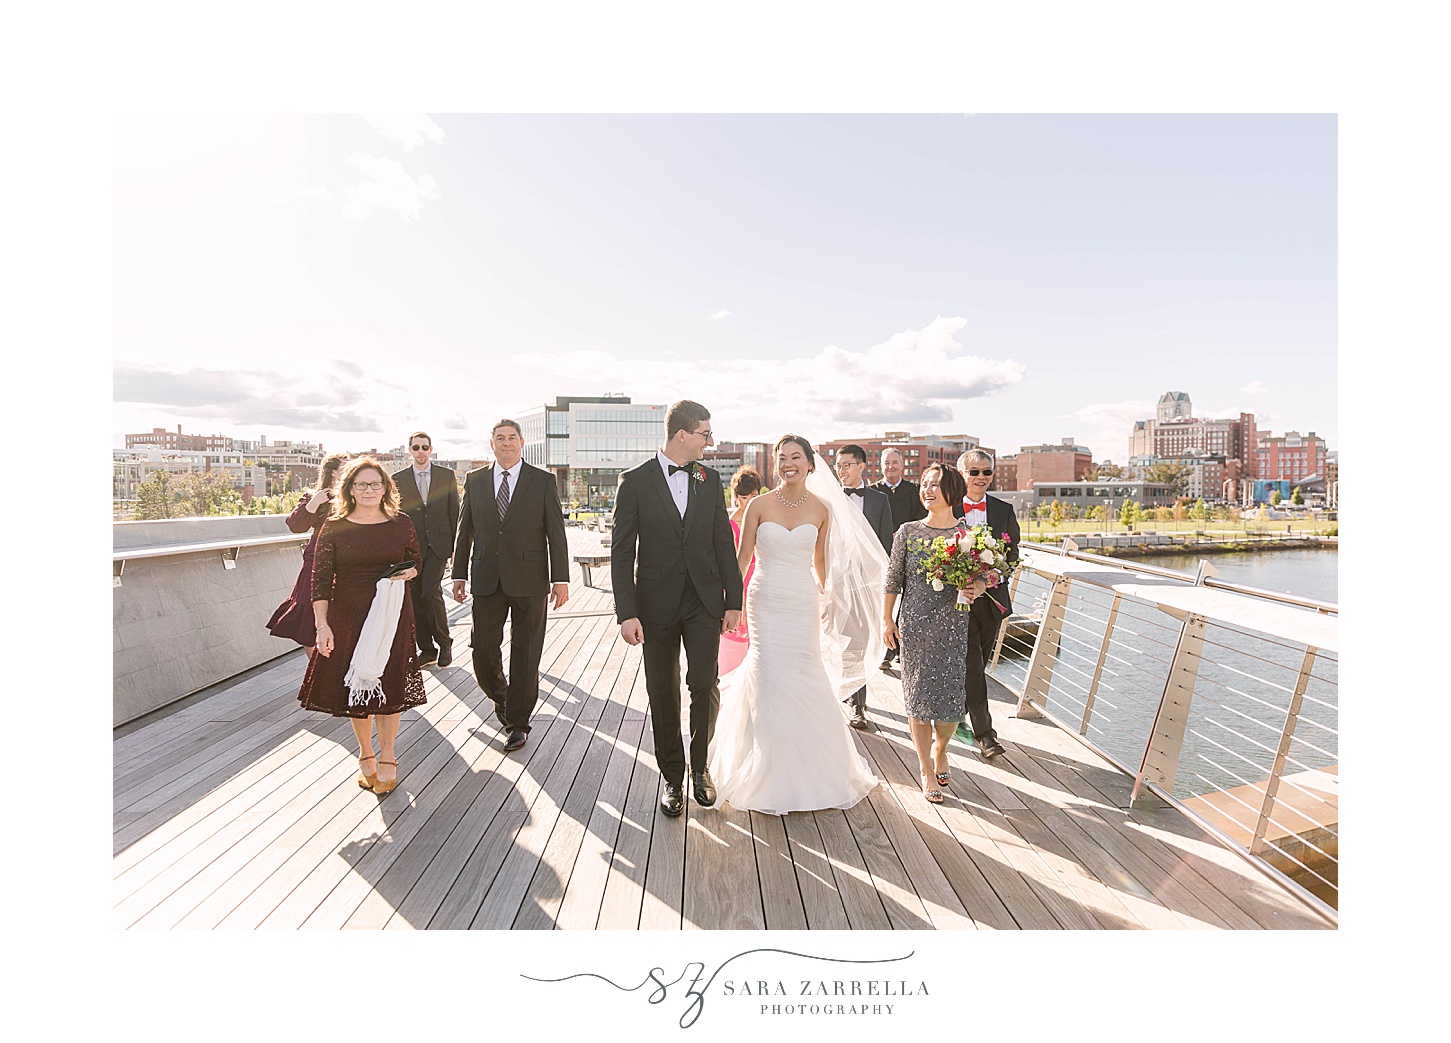 newlyweds walk with family on pedestrian bridge after ceremony